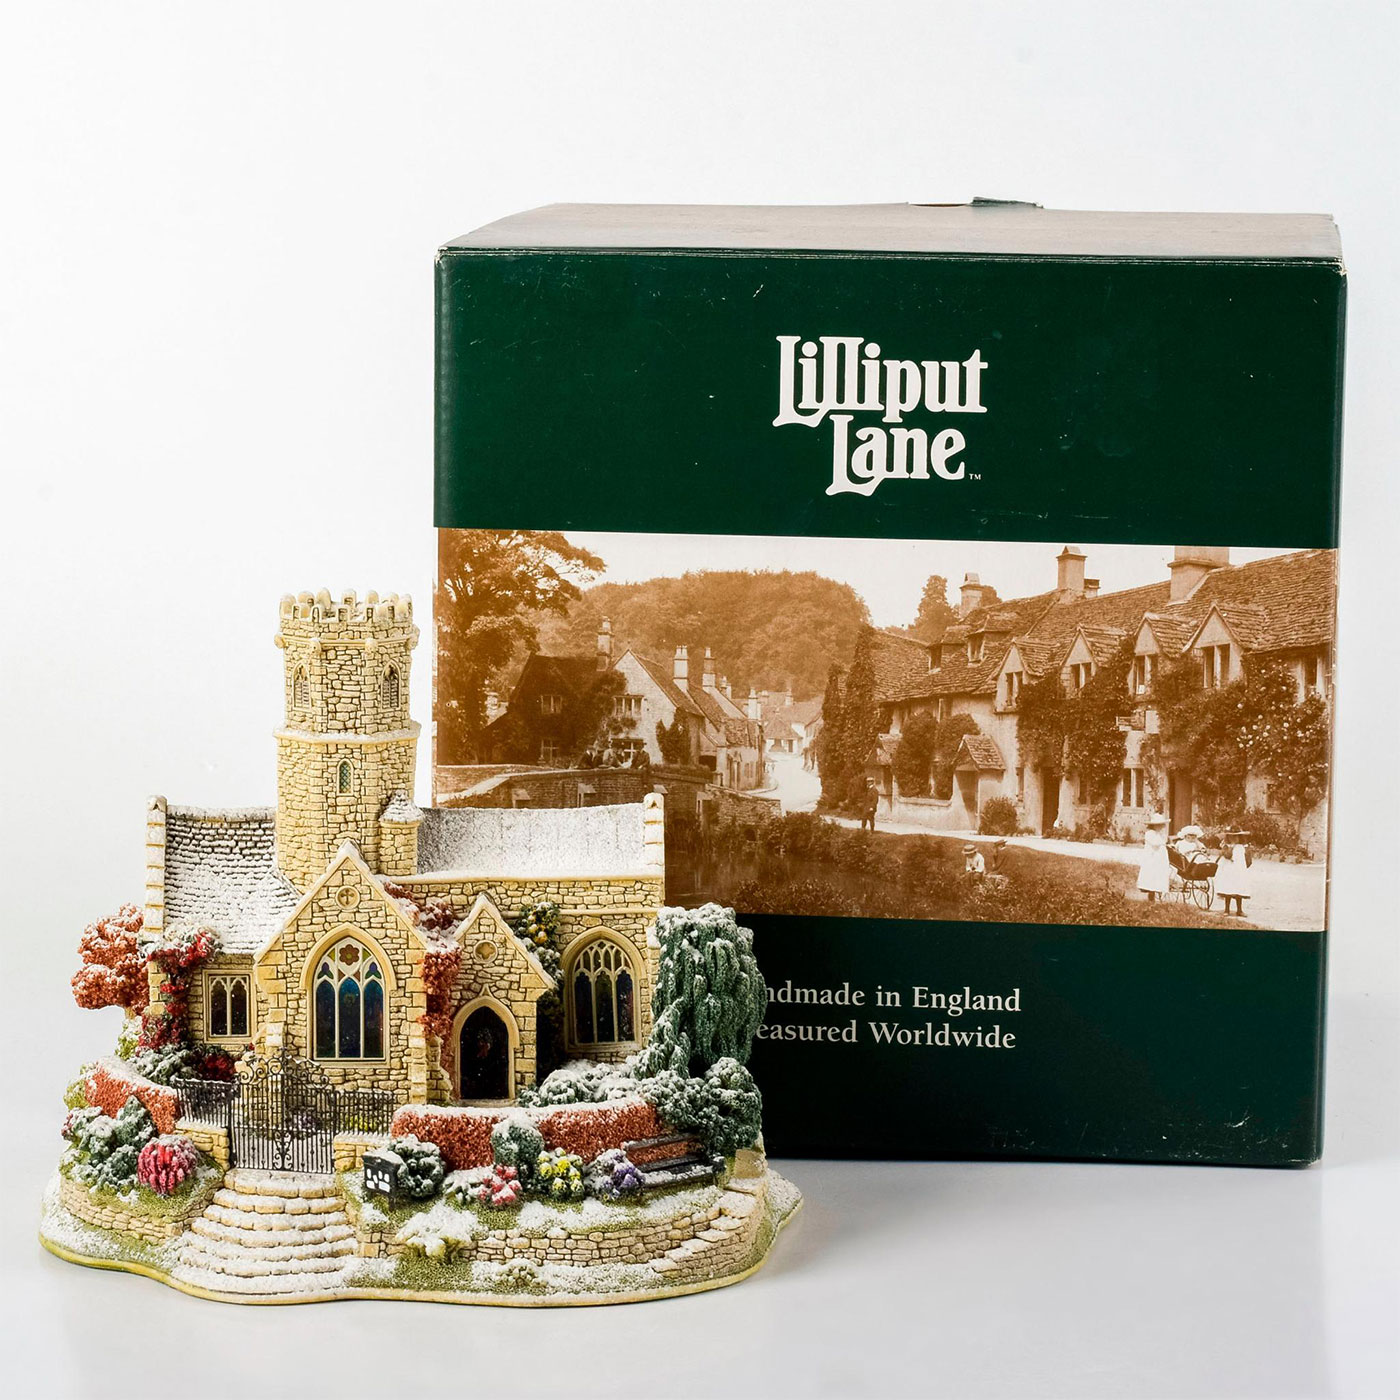 Lilliput Lane Collectable, Lead Kindly Light in Winter L2621